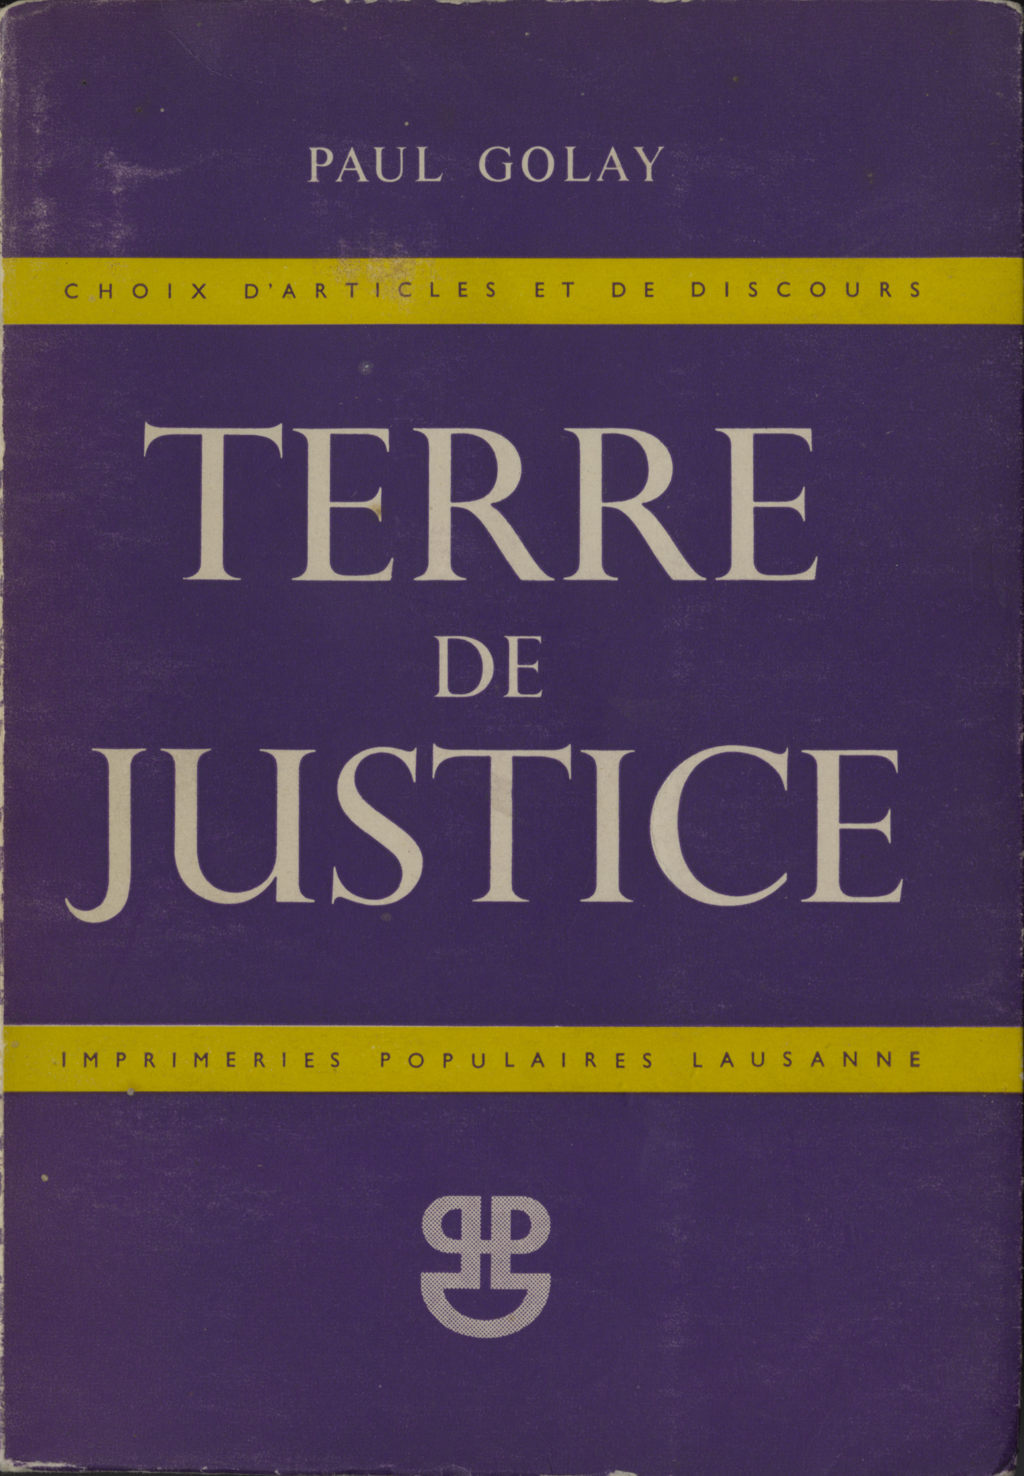 Paul Golay, Terre de justice, Choix d’articles et de discours (1951). Texts collated by Ida Golay and Alice Rivaz shortly after Paul Golay passed away. Foreword by Alice Rivaz and preface by Edmond Privat